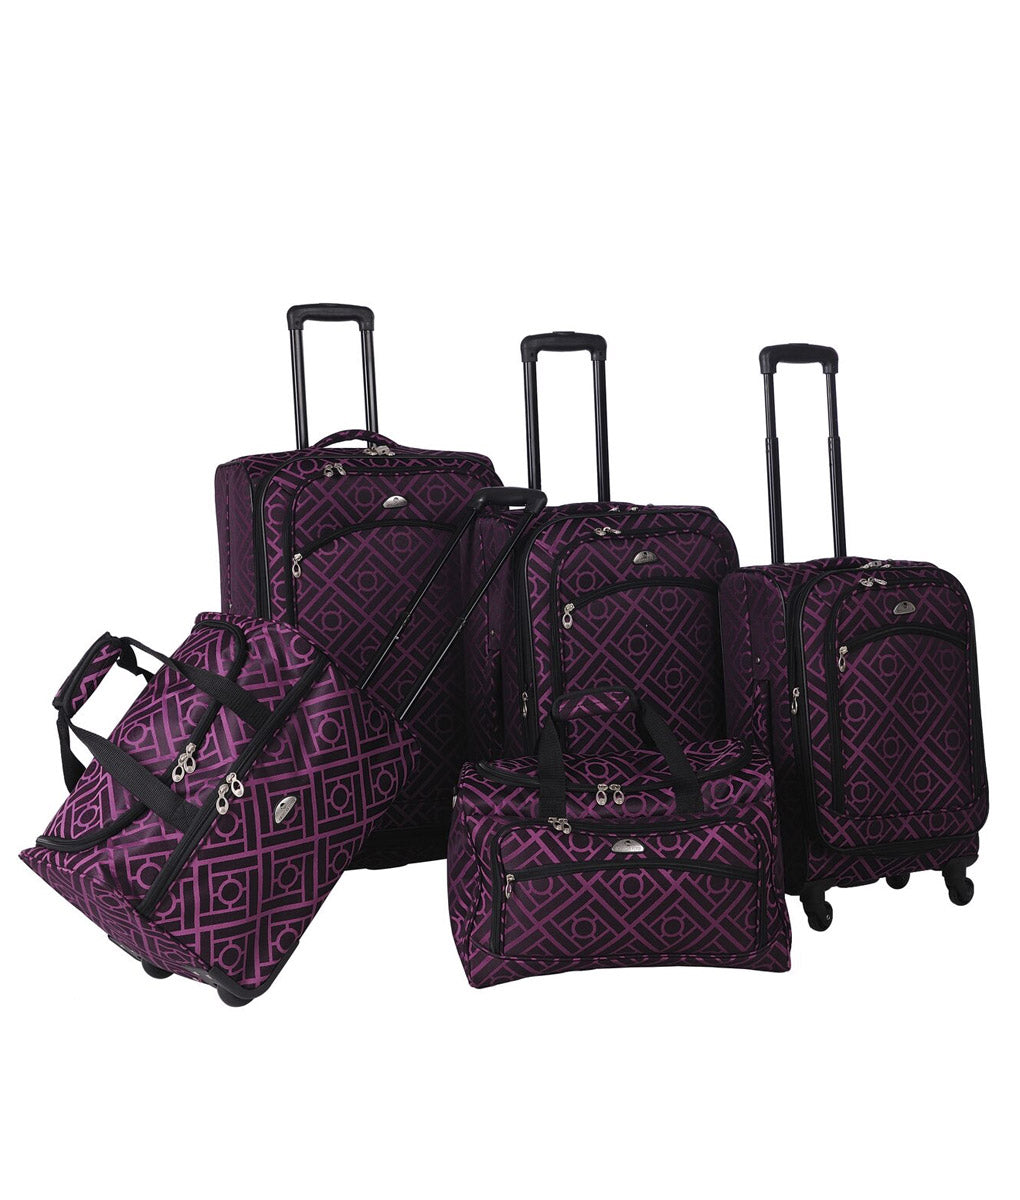 American Flyer Astor Collection 5-Piece Spinner Luggage Set